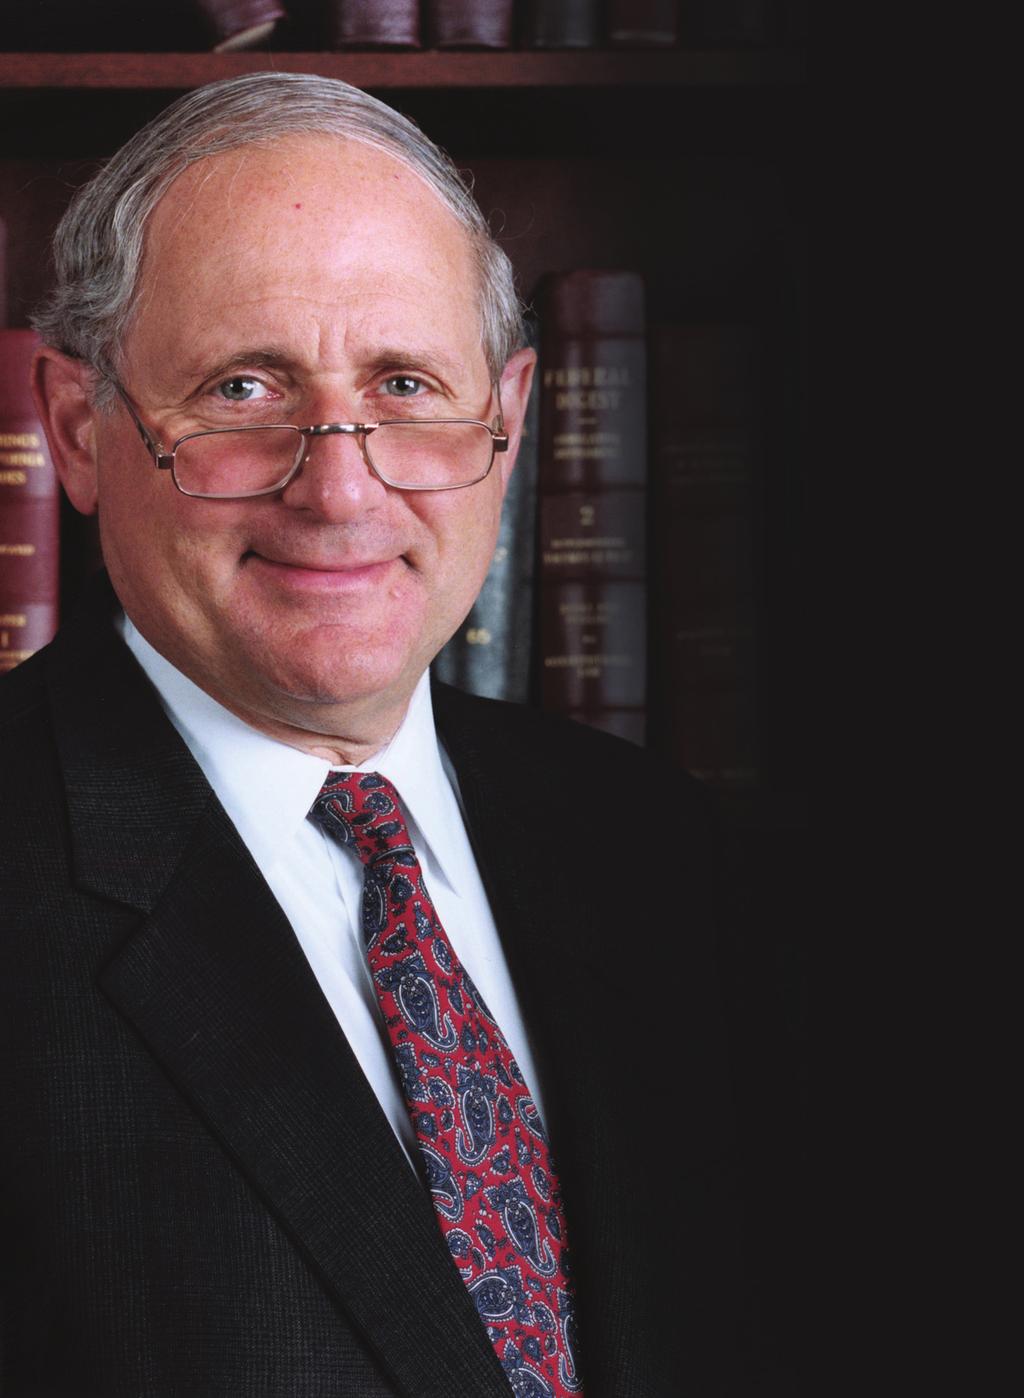 Carl Levin touts his Wayne State center for good governance By Carl Levin, originally written for Bridge Magazine, June 4, 2015 Having returned to Michigan after 36 years in our nation s capital, I